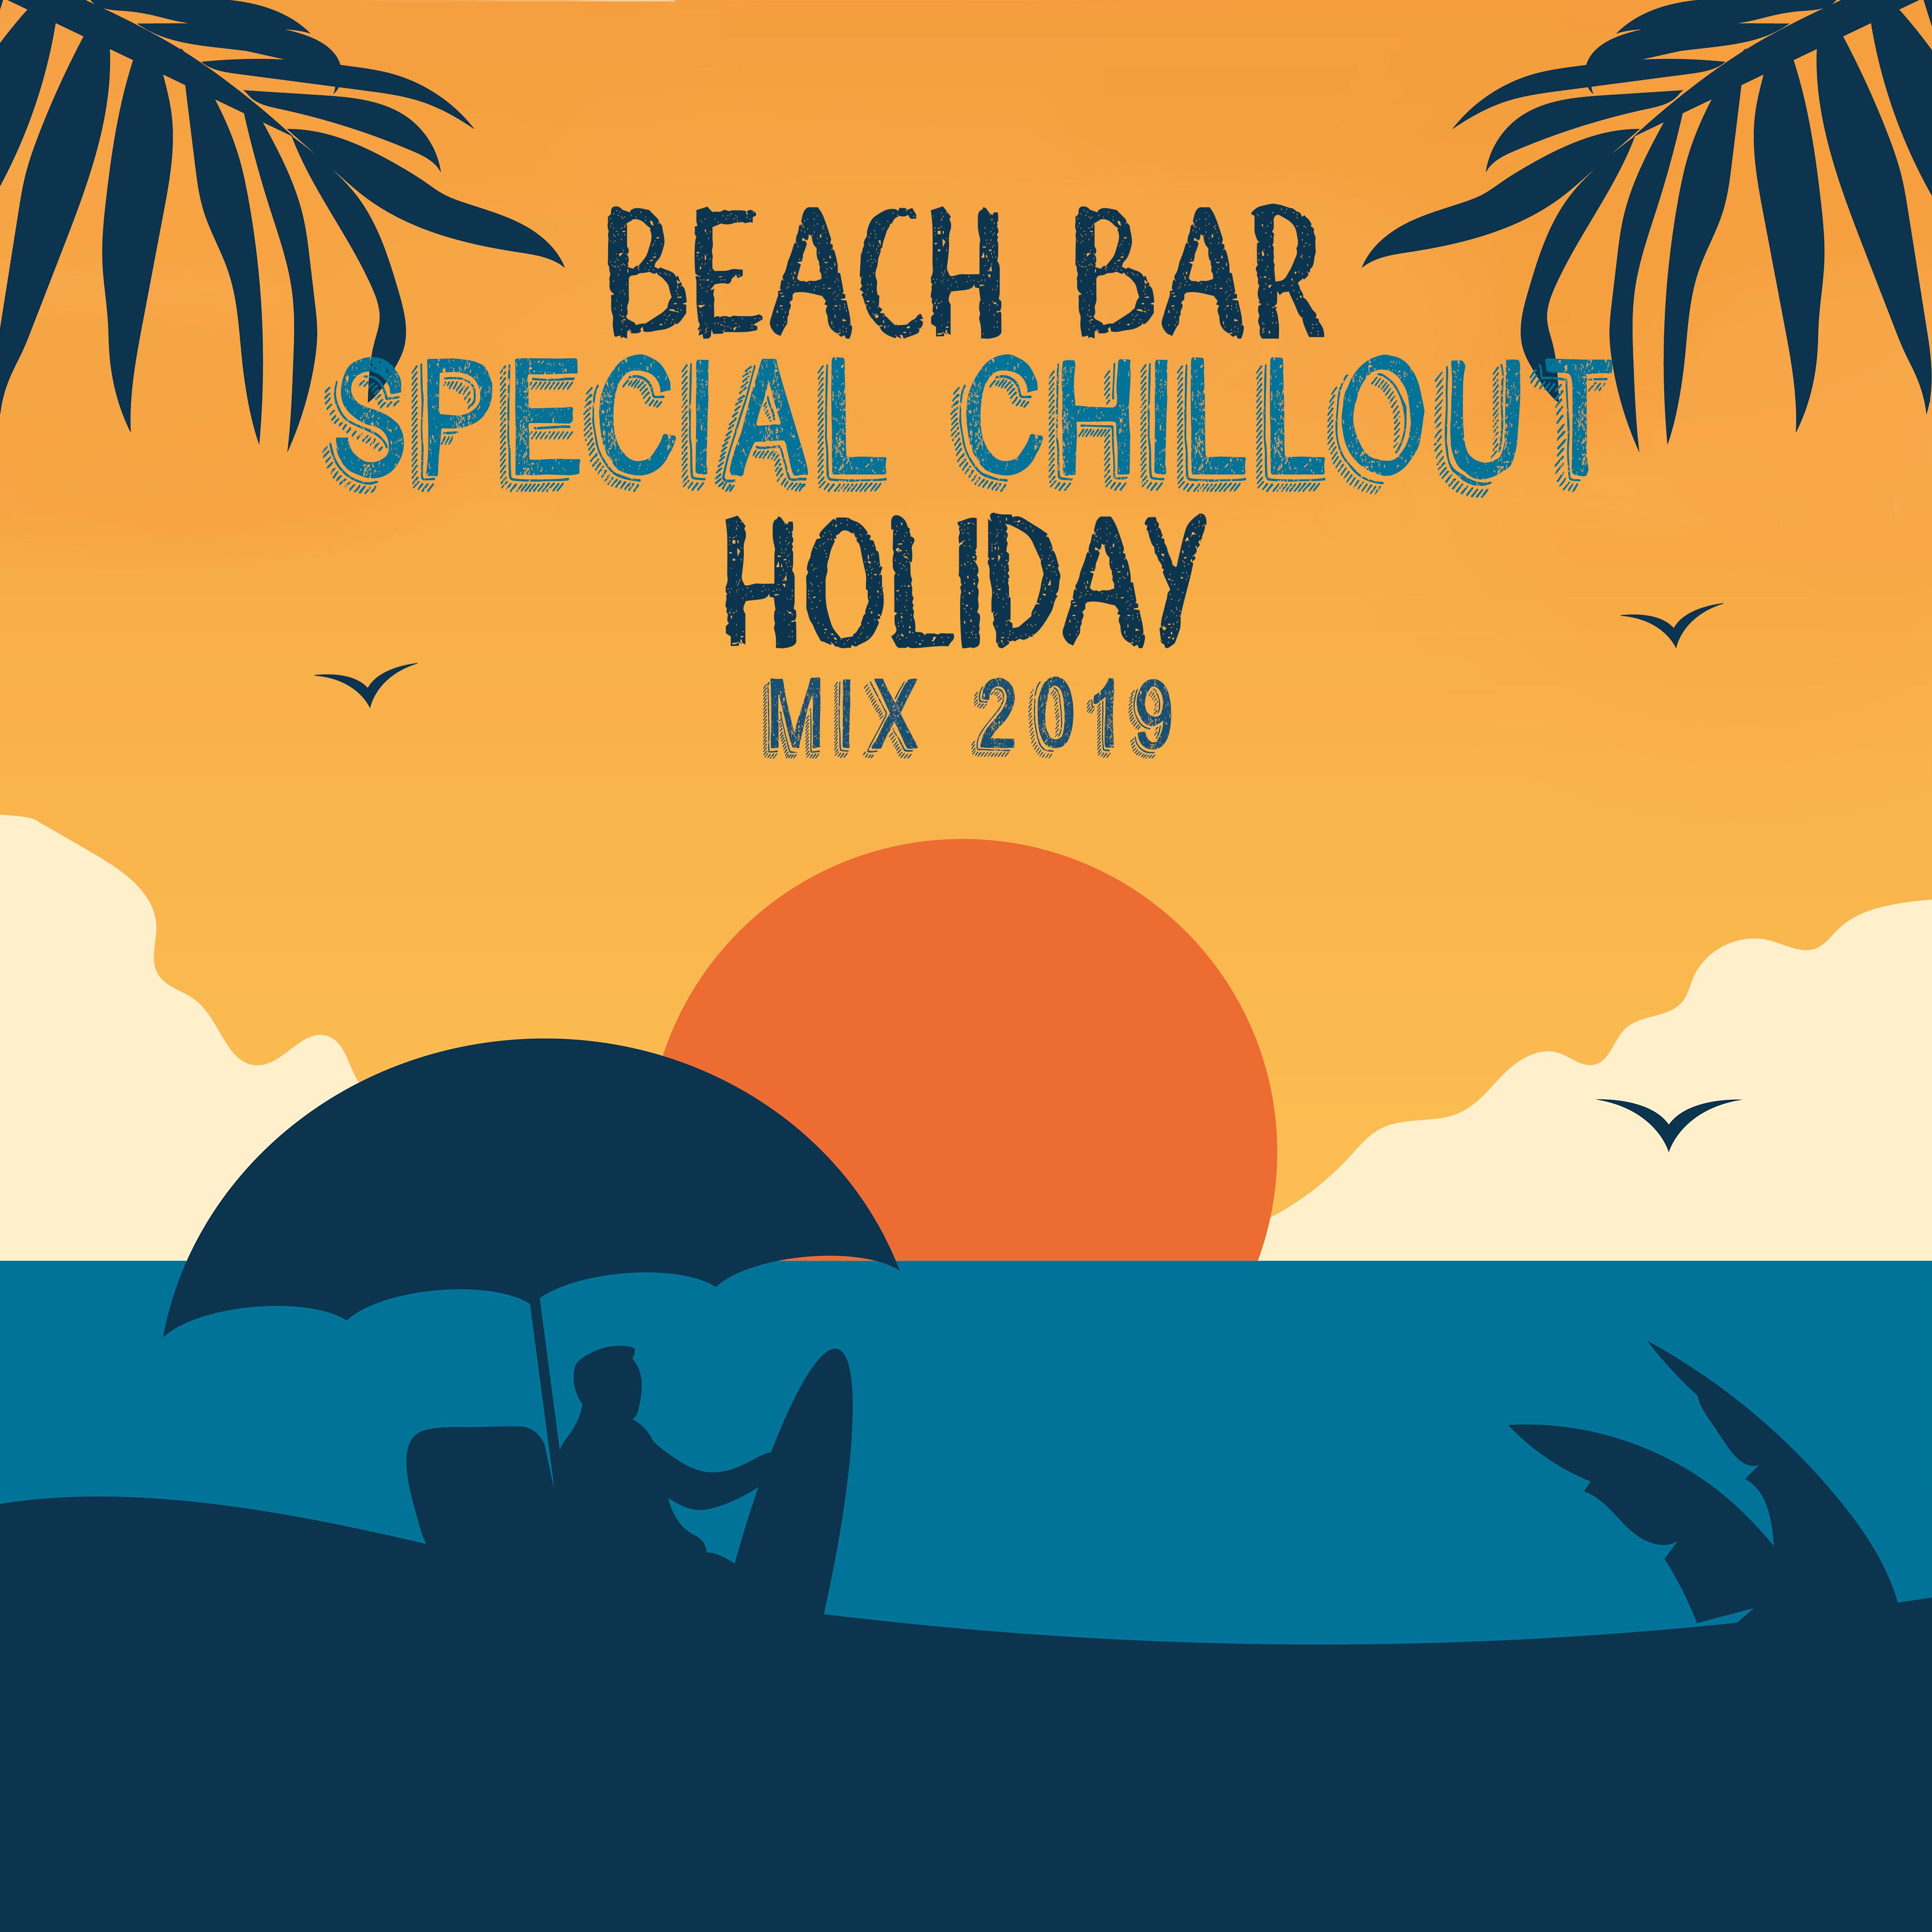 Beach Bar Special Chillout Holiday Mix 2019